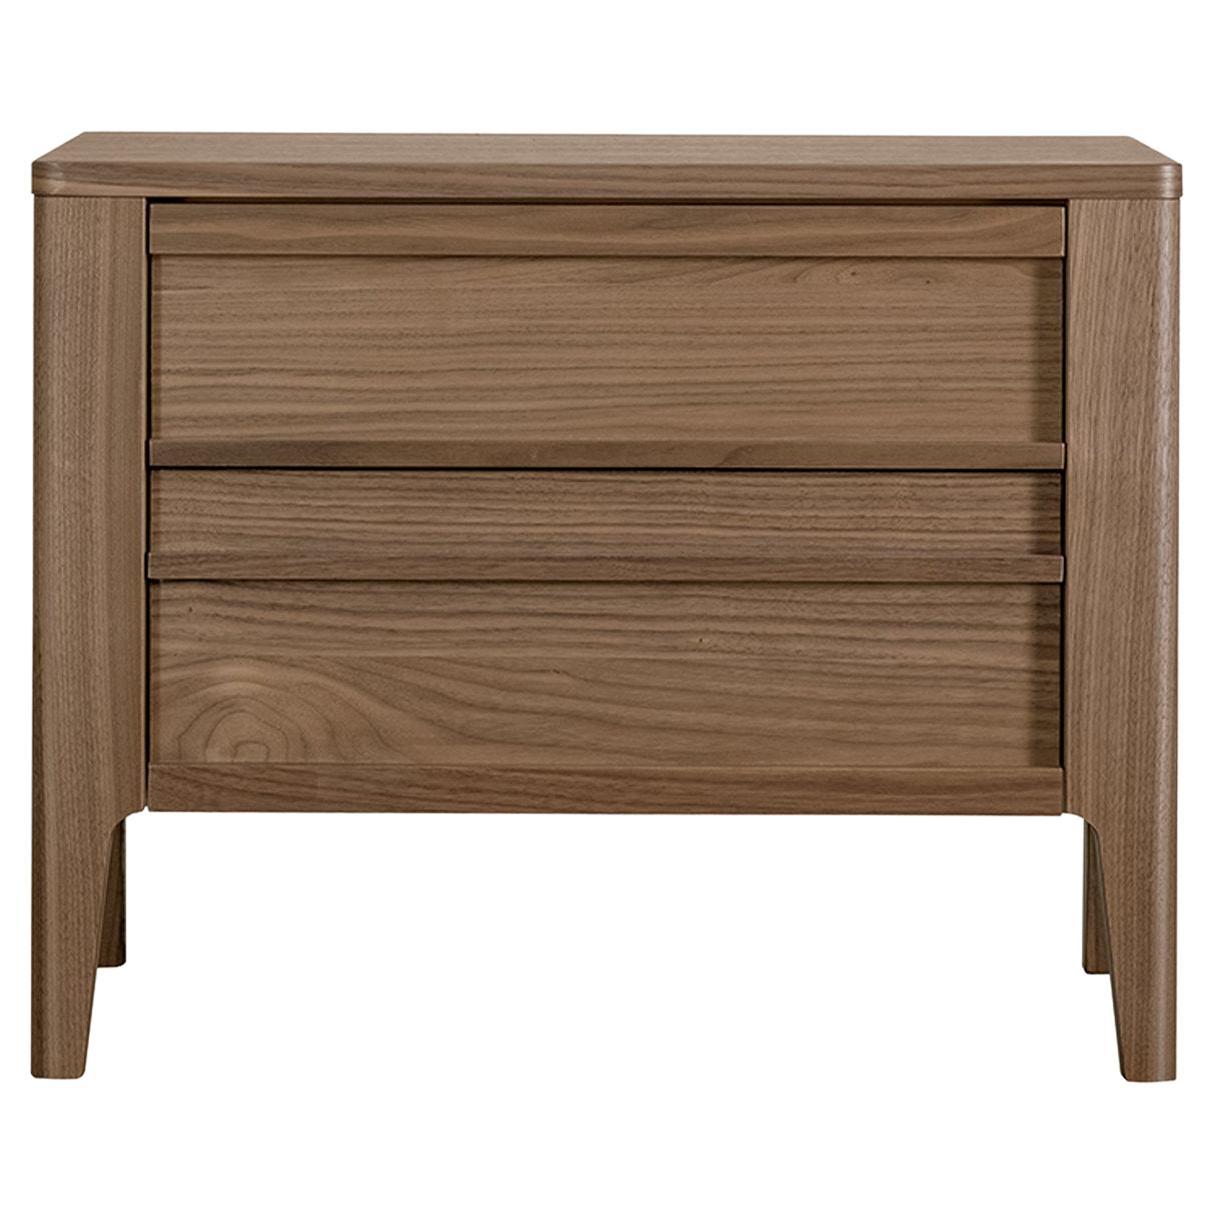 Wood Shangai Nightstand MODO10 Collection For Sale